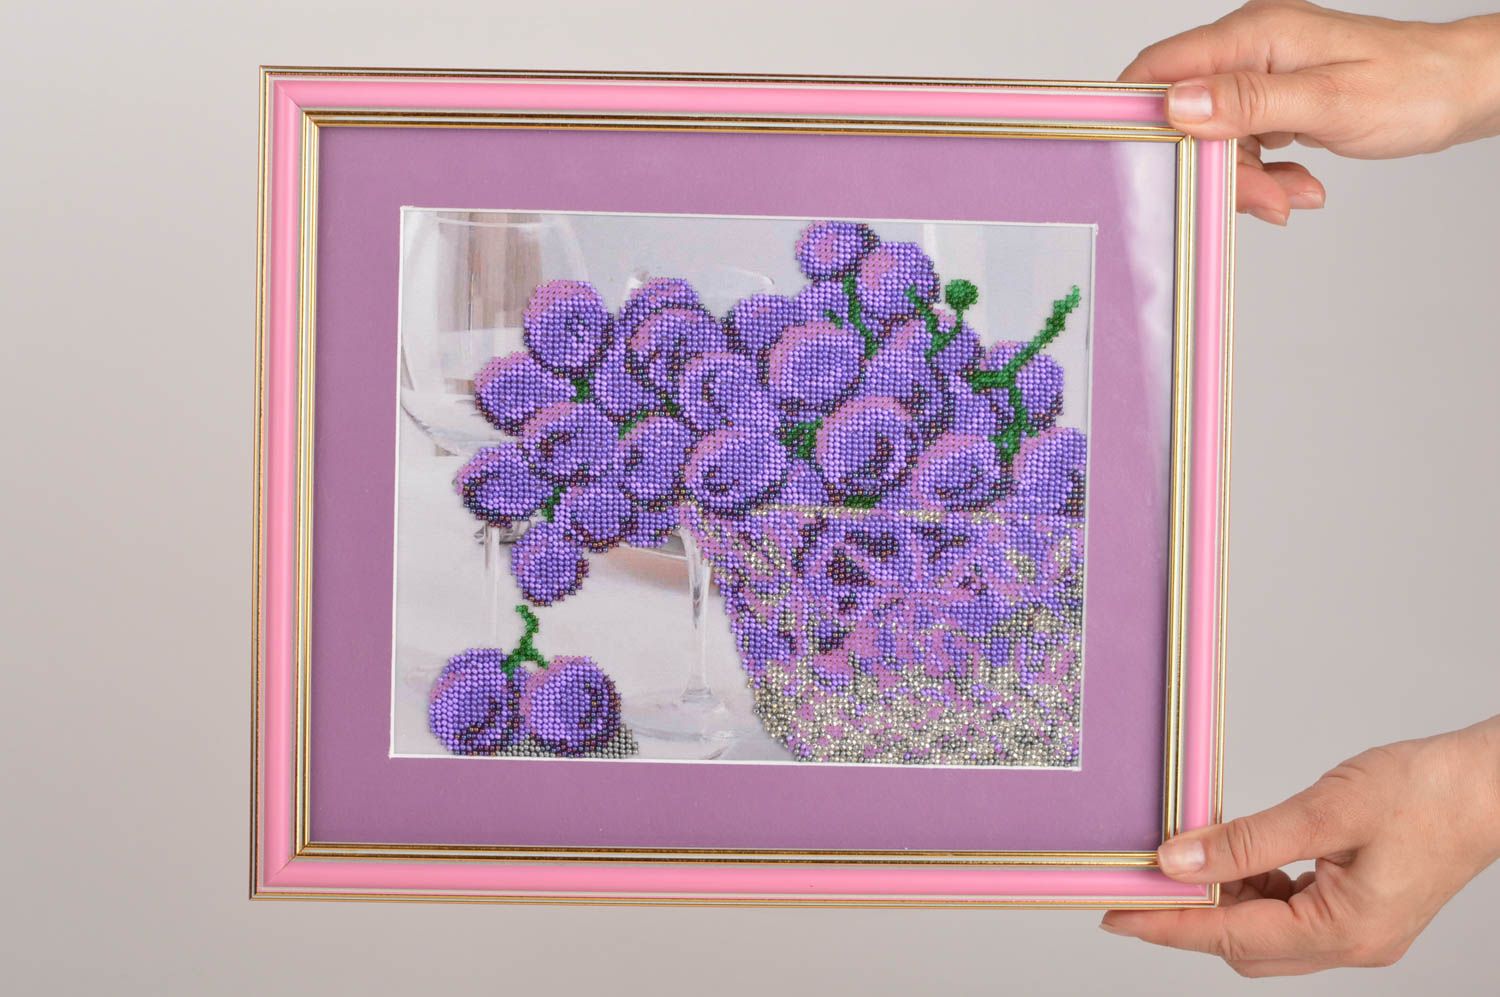 Handmade designer picture embroidered with beads in frame under glass Grapes photo 3